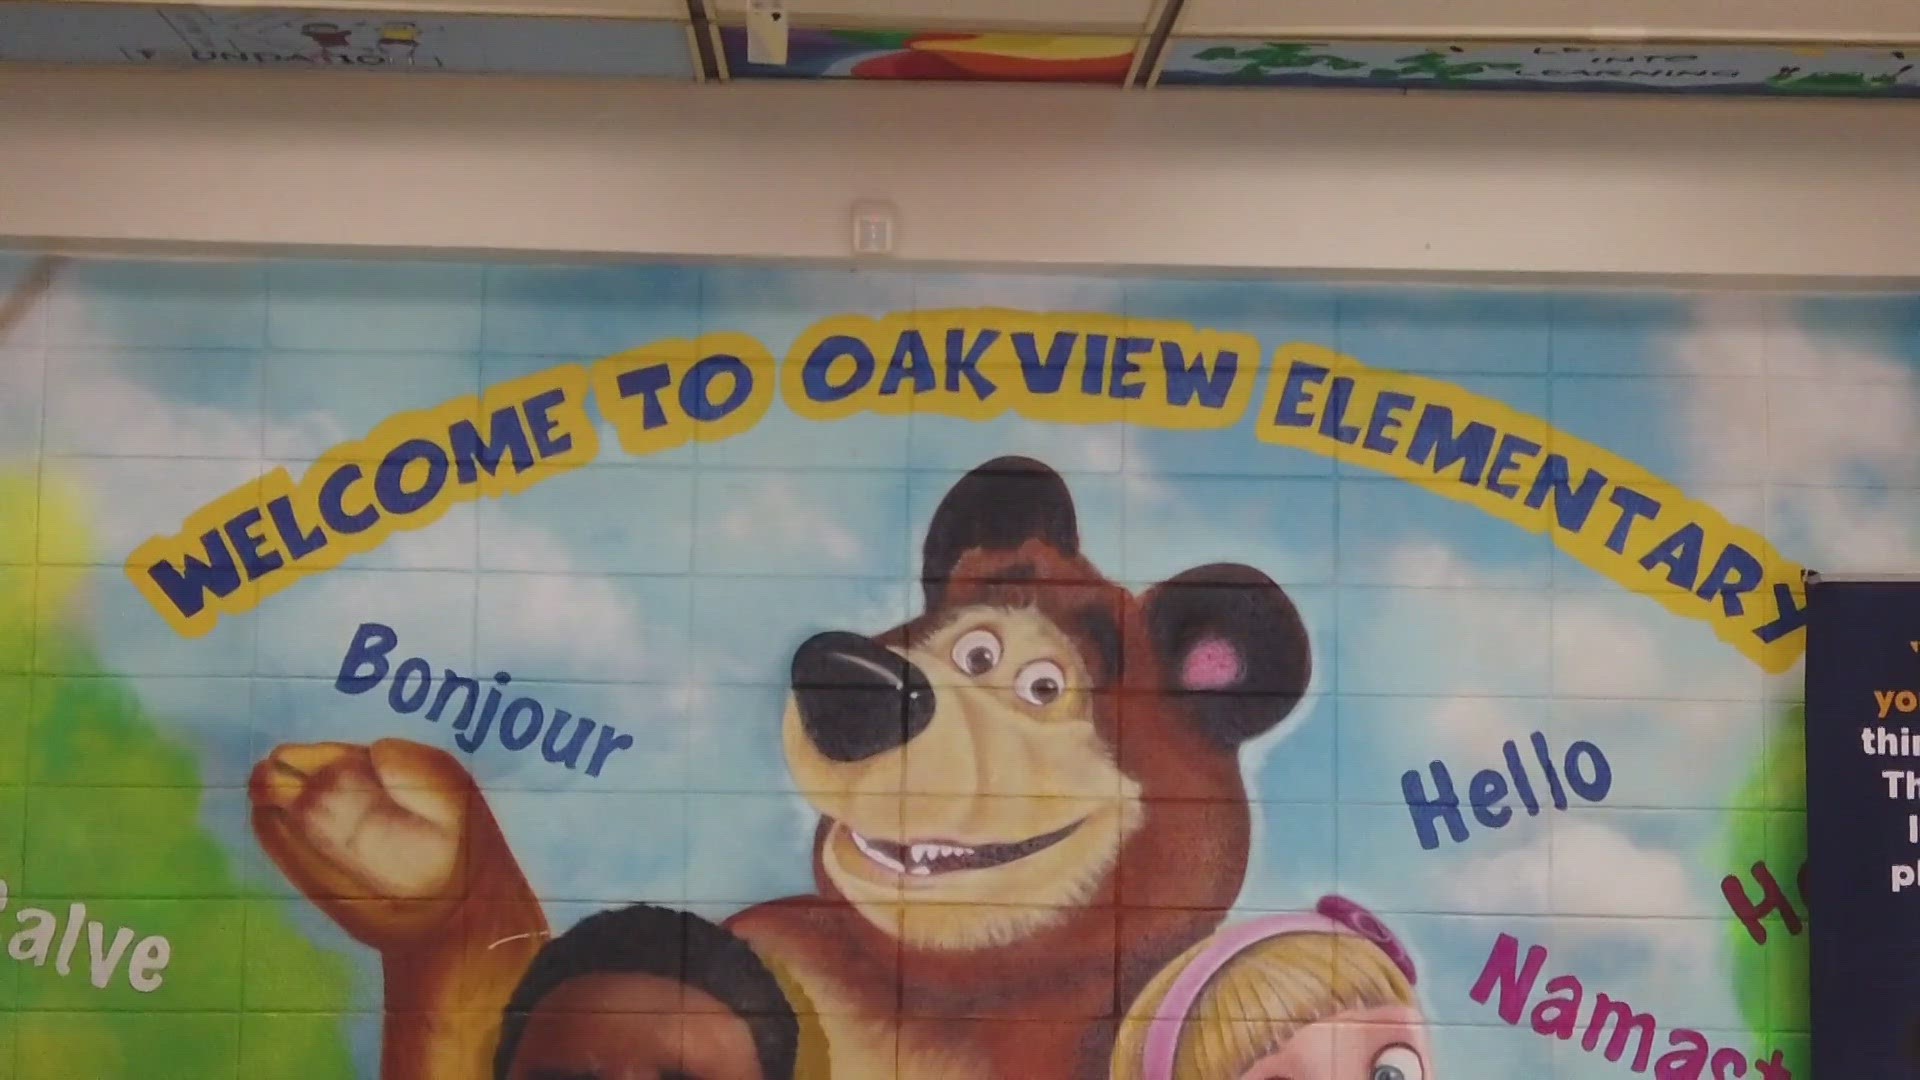 We went to Oak View Elementary School to share the importance of reading.